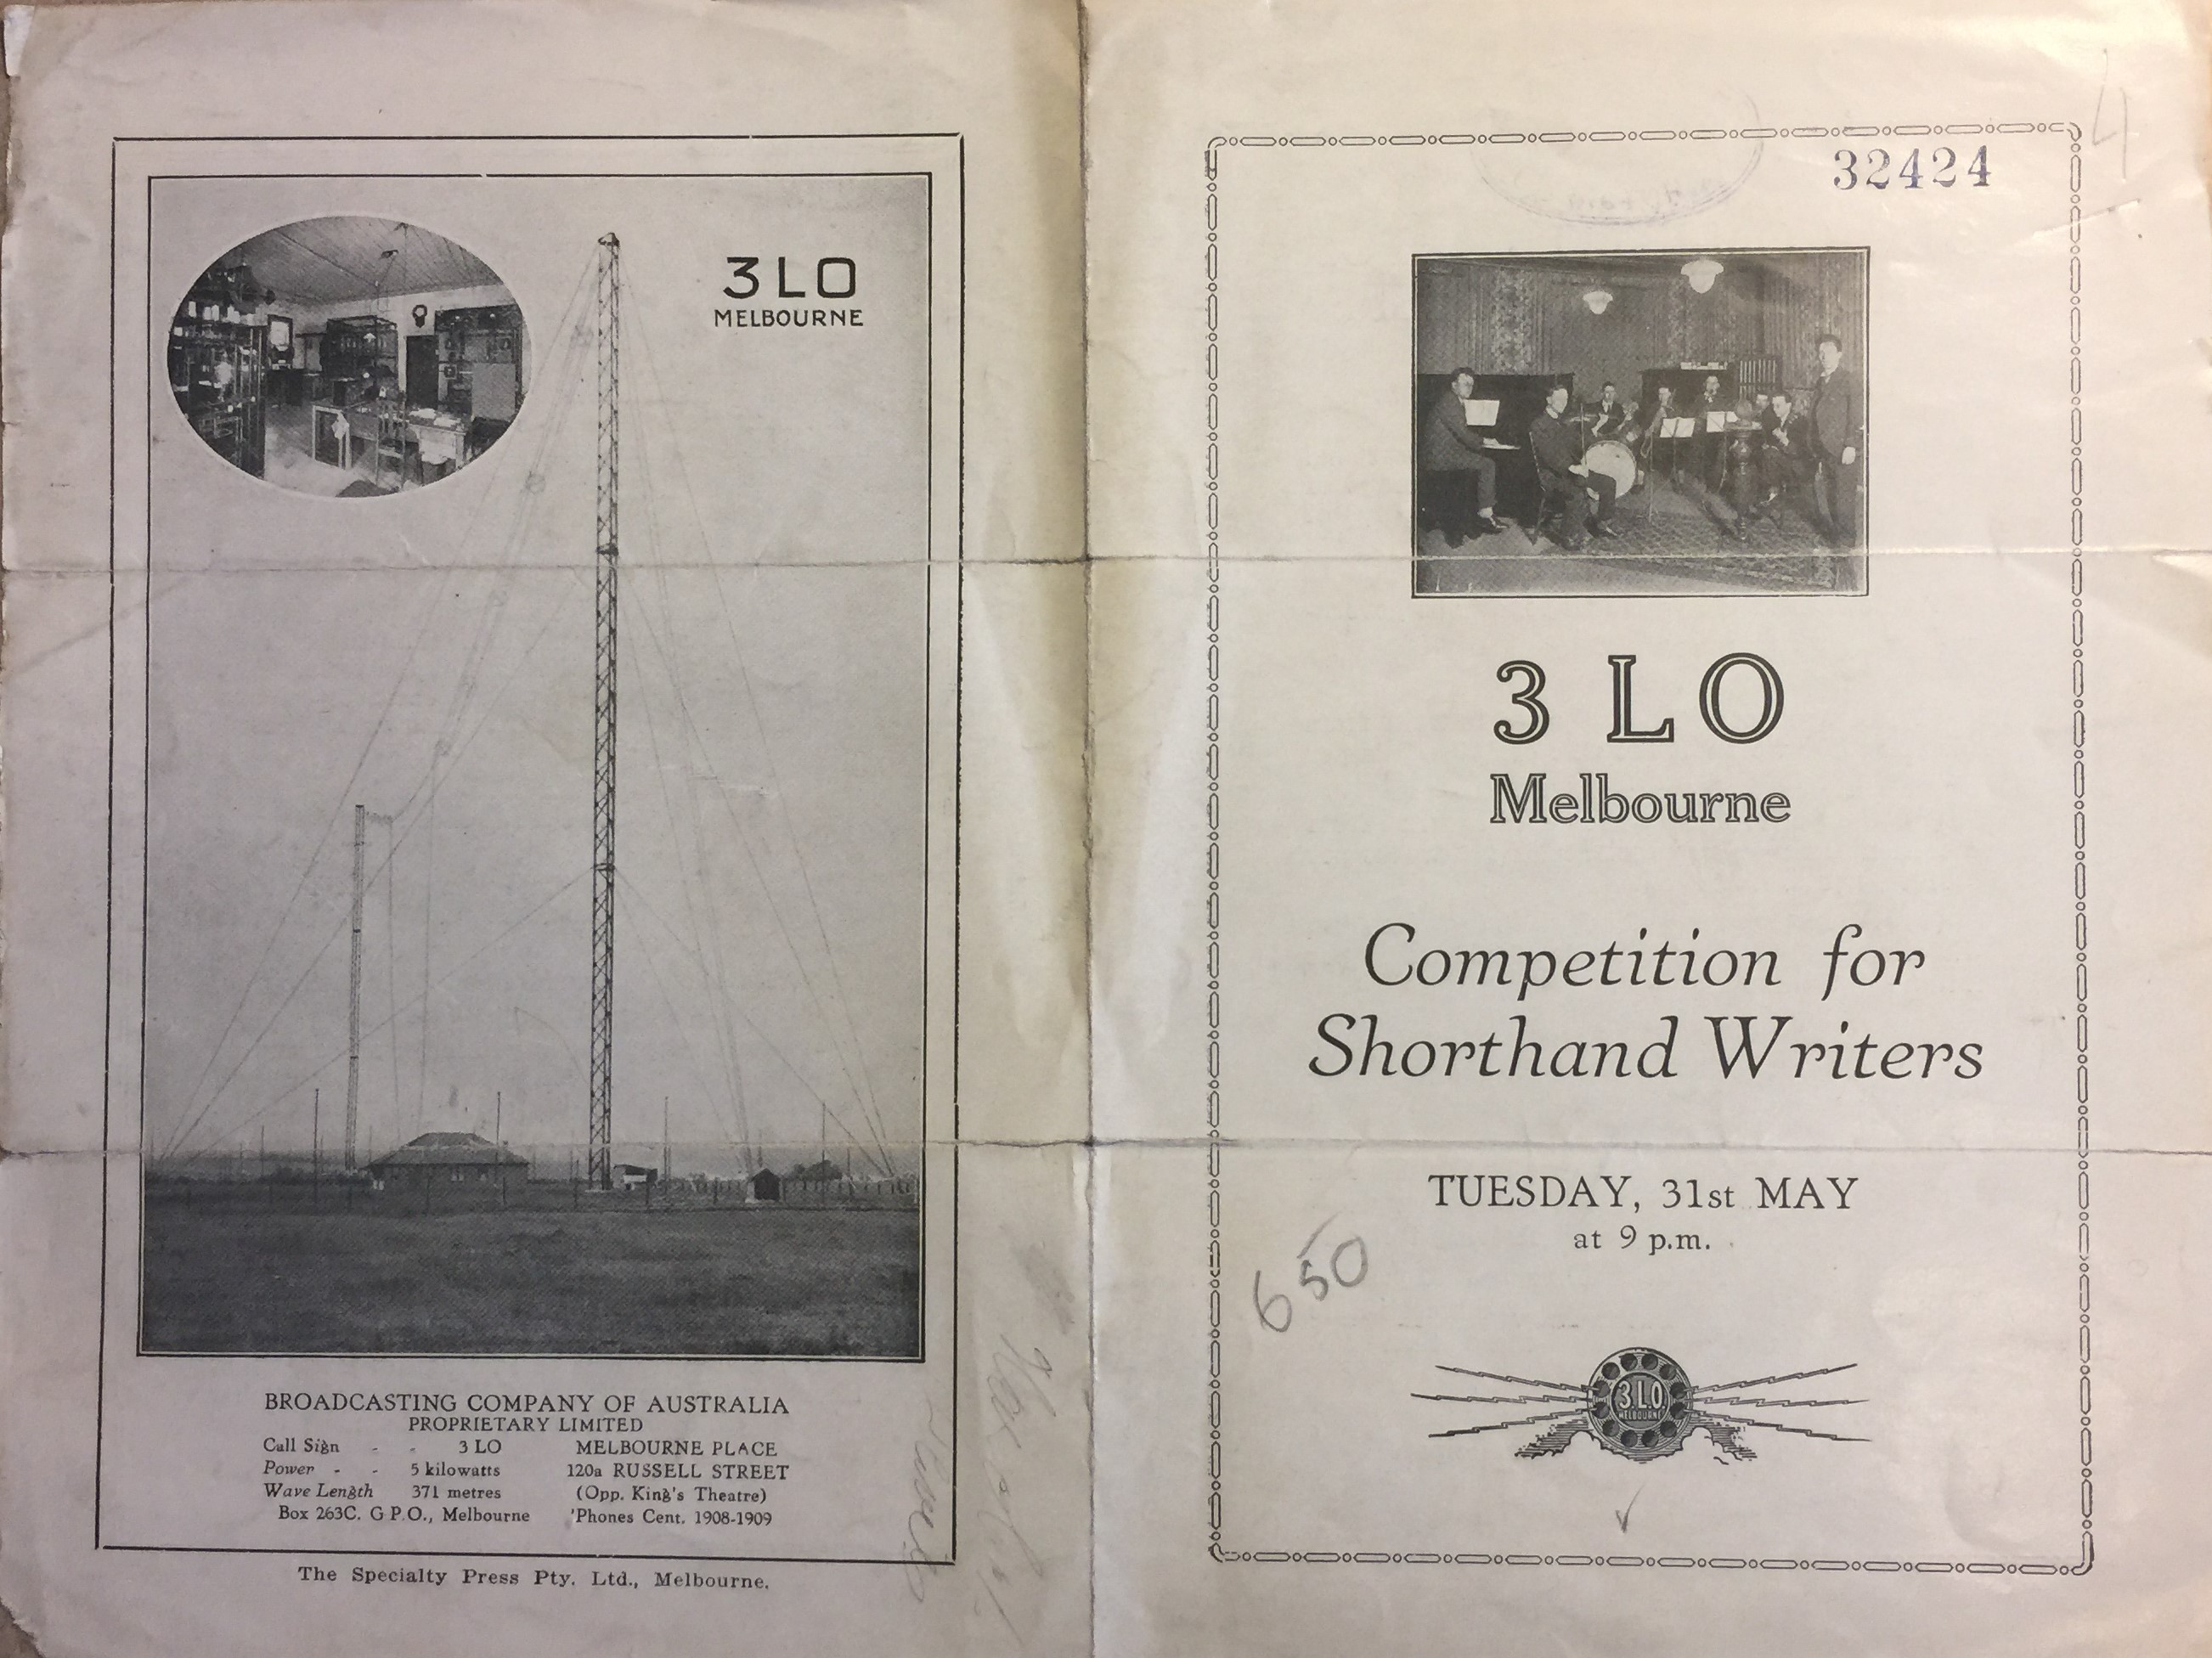 a brochure - opened flat showing the front and back pages. The front cover reads 3LO Melbourne Competition for Shorthand Writers Tuesday 31st May at 9pm. The back cover shows an image of a radio tower 